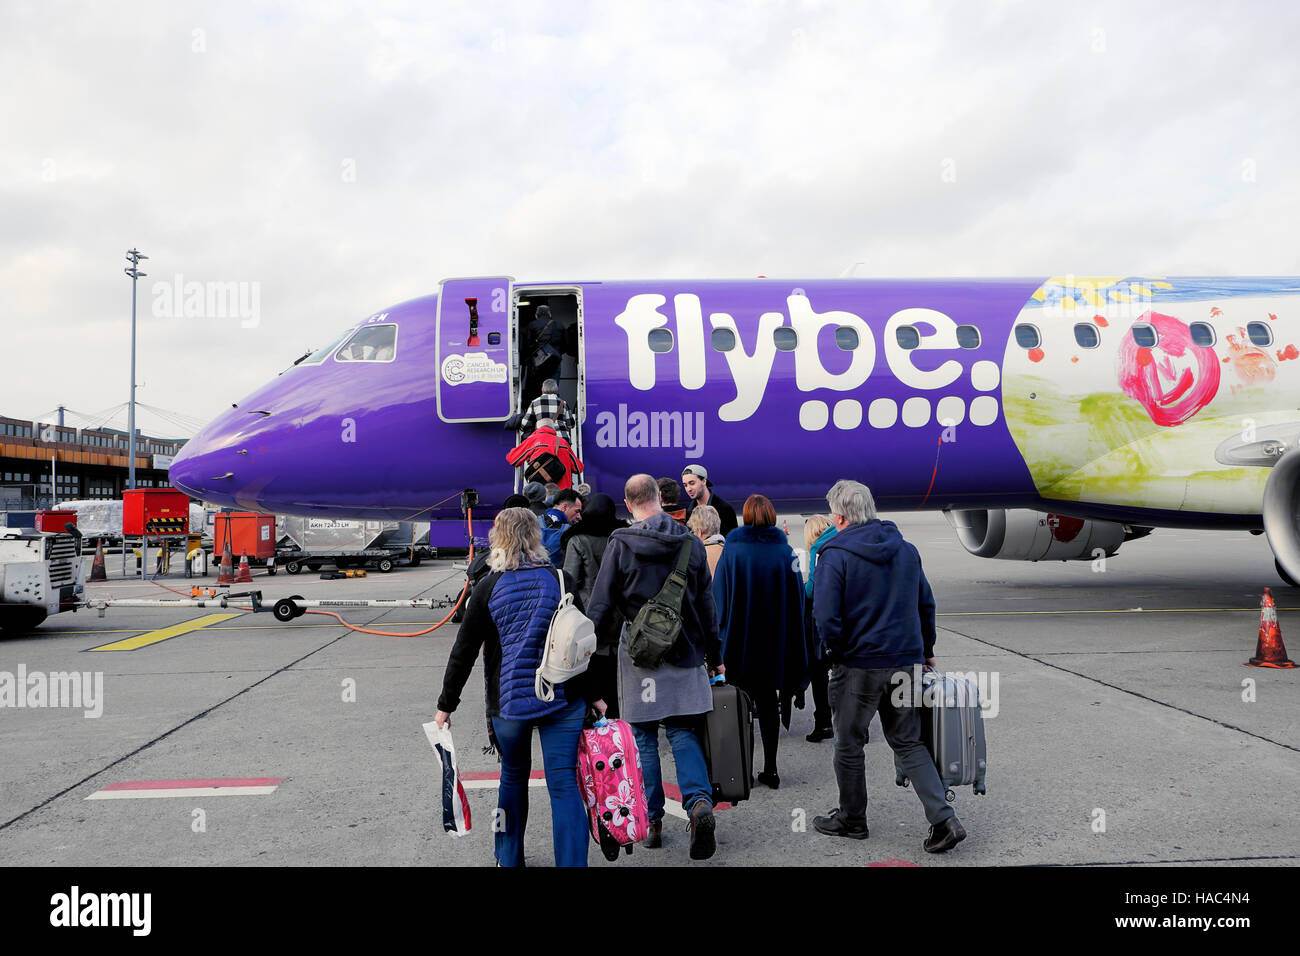 Passengers people carrying luggage getting on plane boarding a Flybe airplane on the tarmac at Cardiff airport in Wales UK Europe 2016    KATHY DEWITT Stock Photo